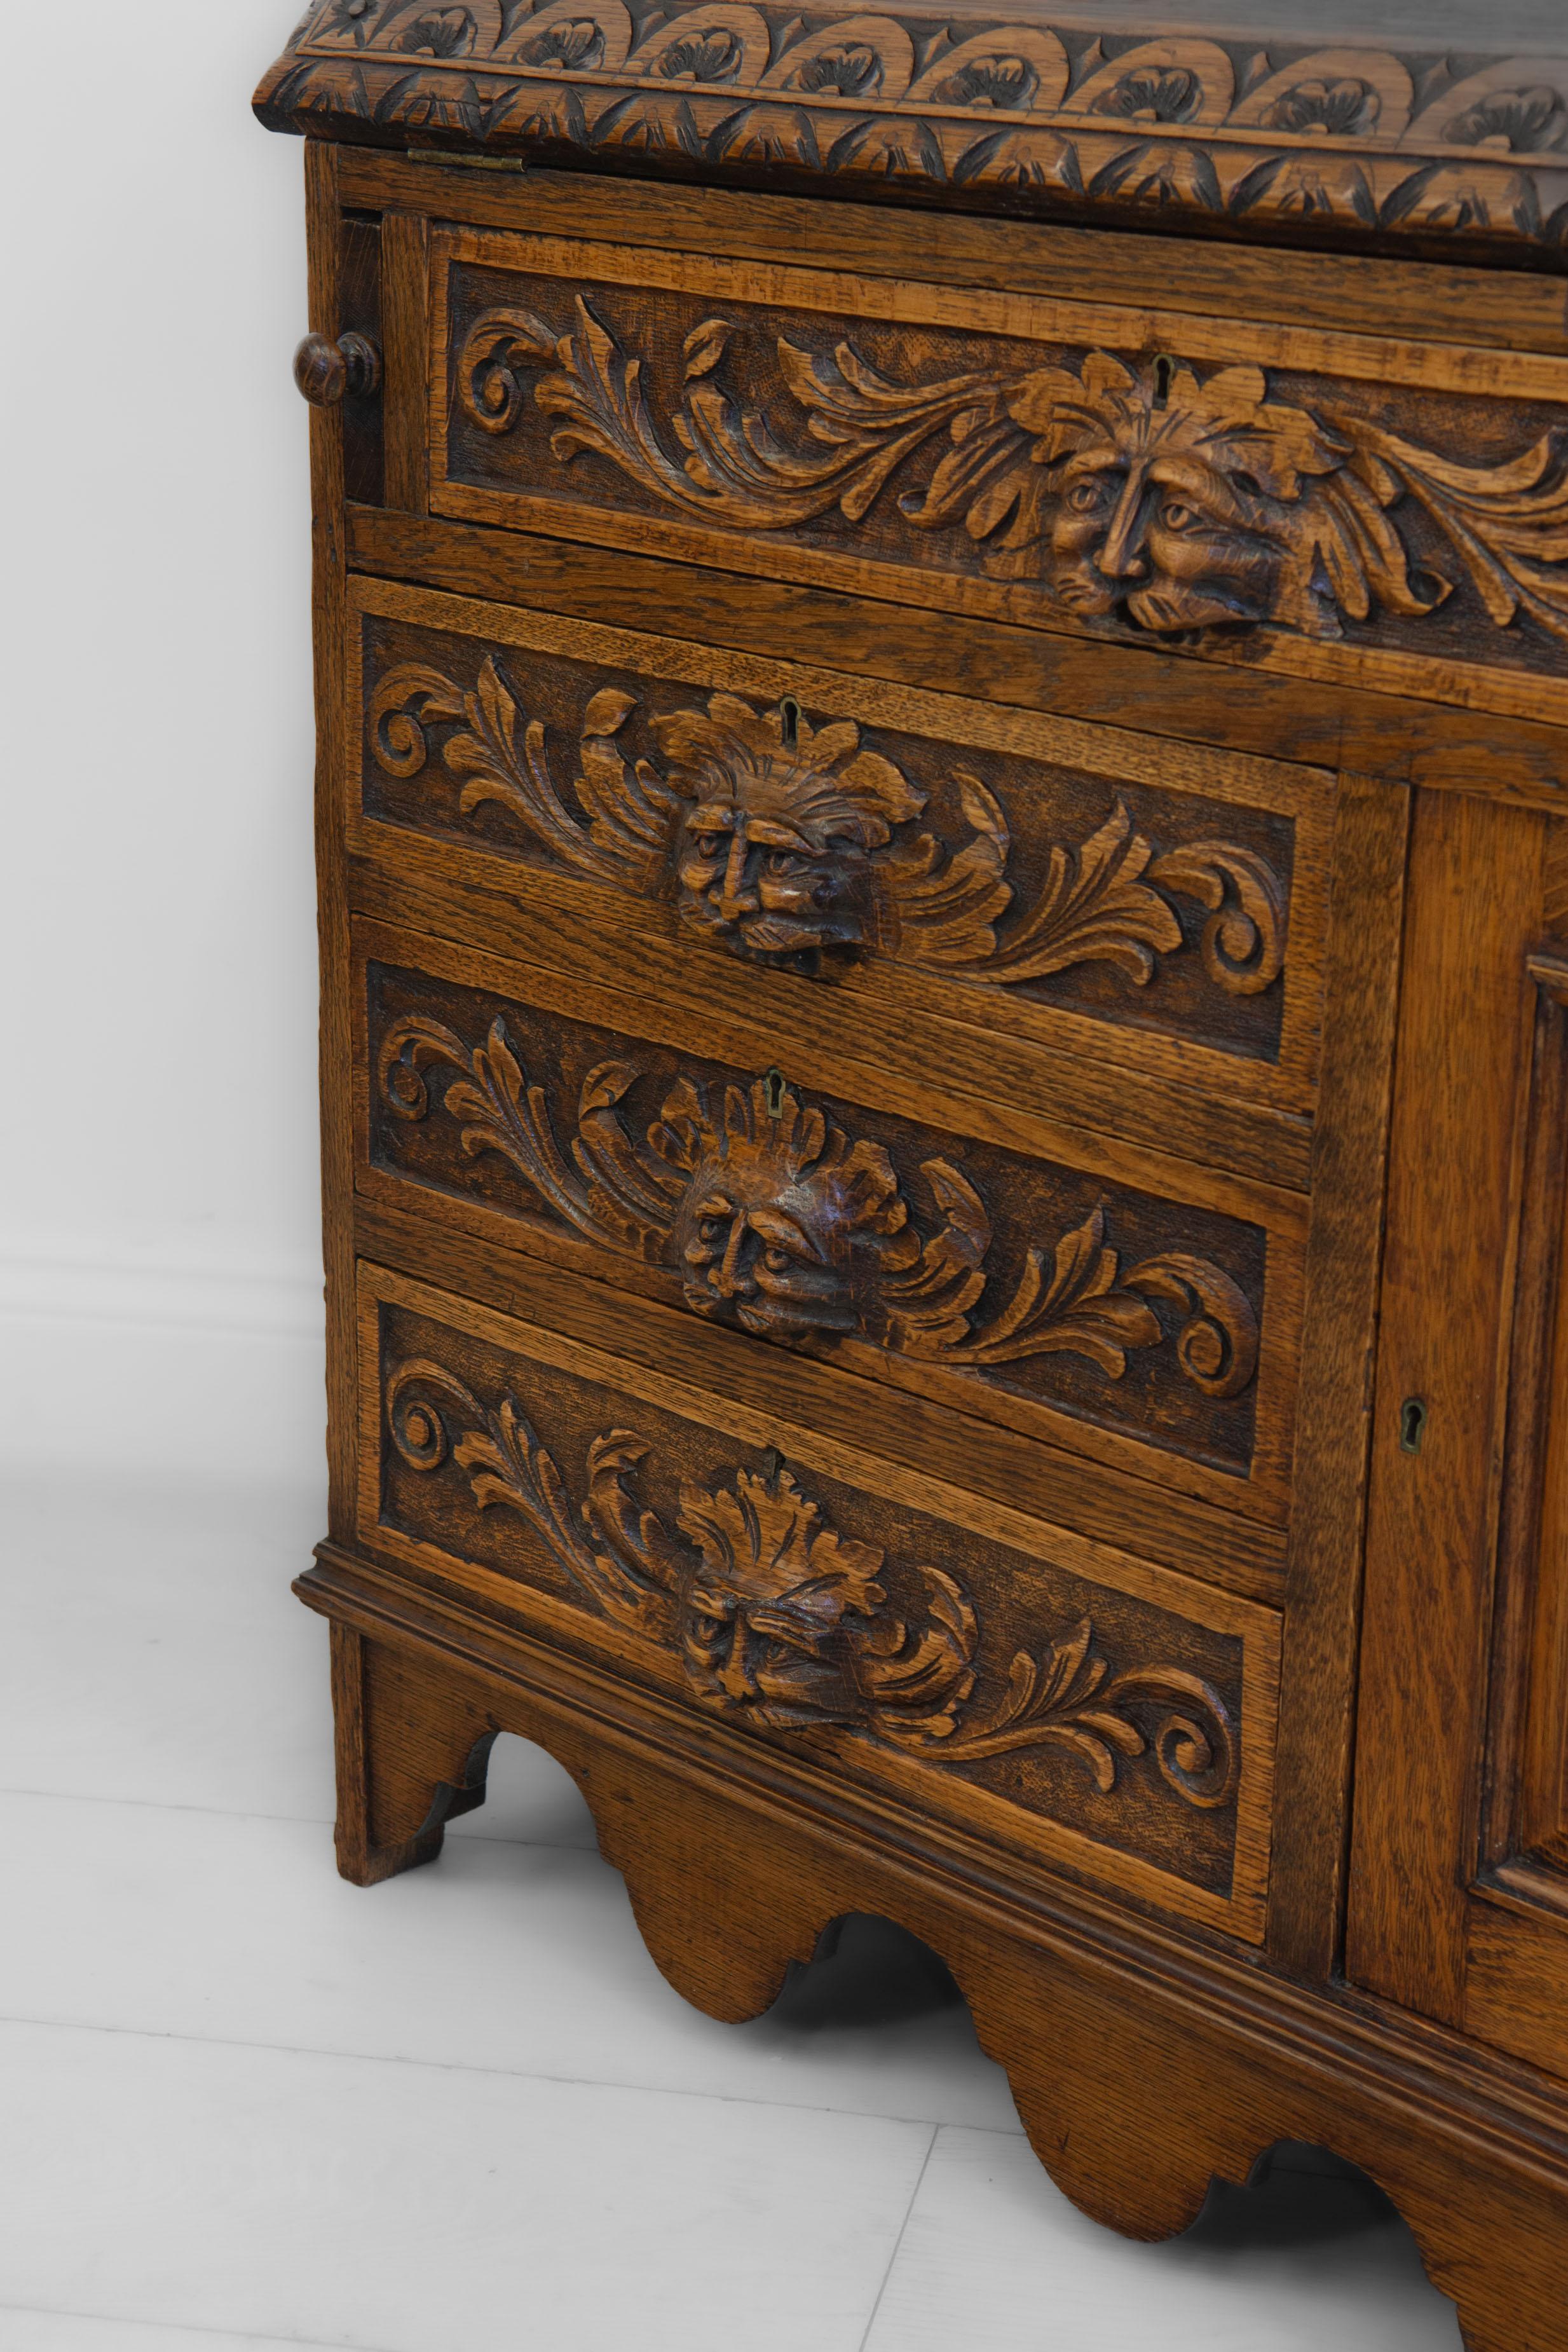 An antique English carved golden oak green man bureau/desk, circa 1890.

The bureau has a wonderful rich golden colour and has been sympathetically re-finished by hand in a shellac sealer. It has a smooth waxed finish, but still retains a few